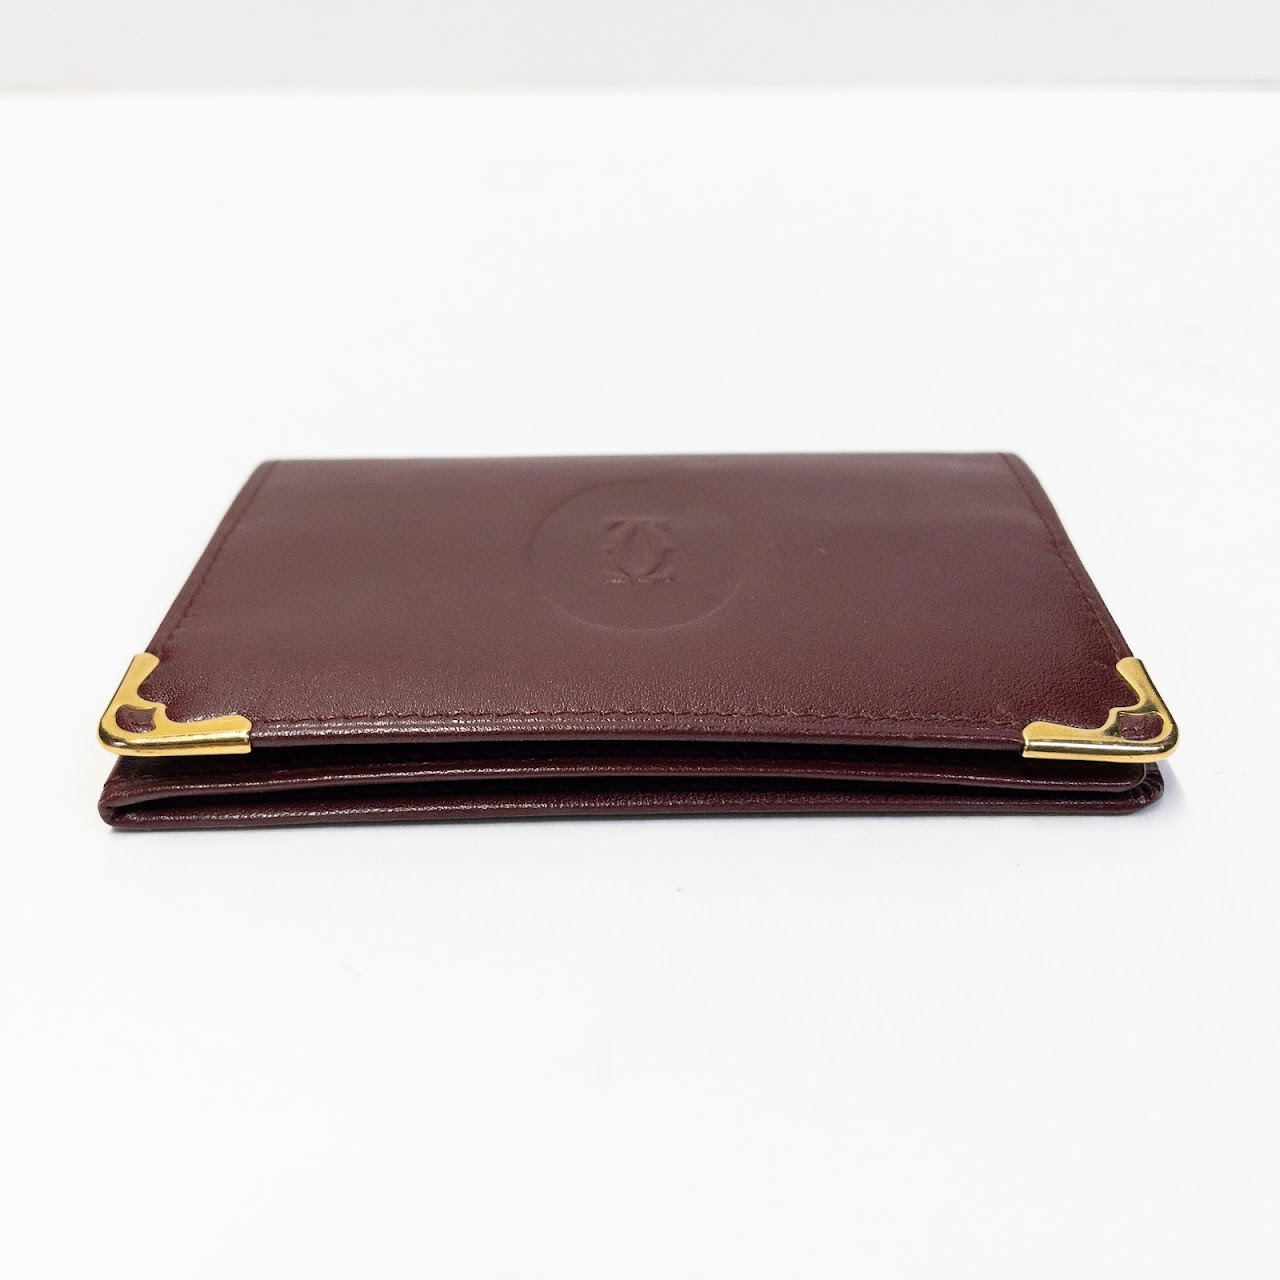 Cartier Red Leather Wallet